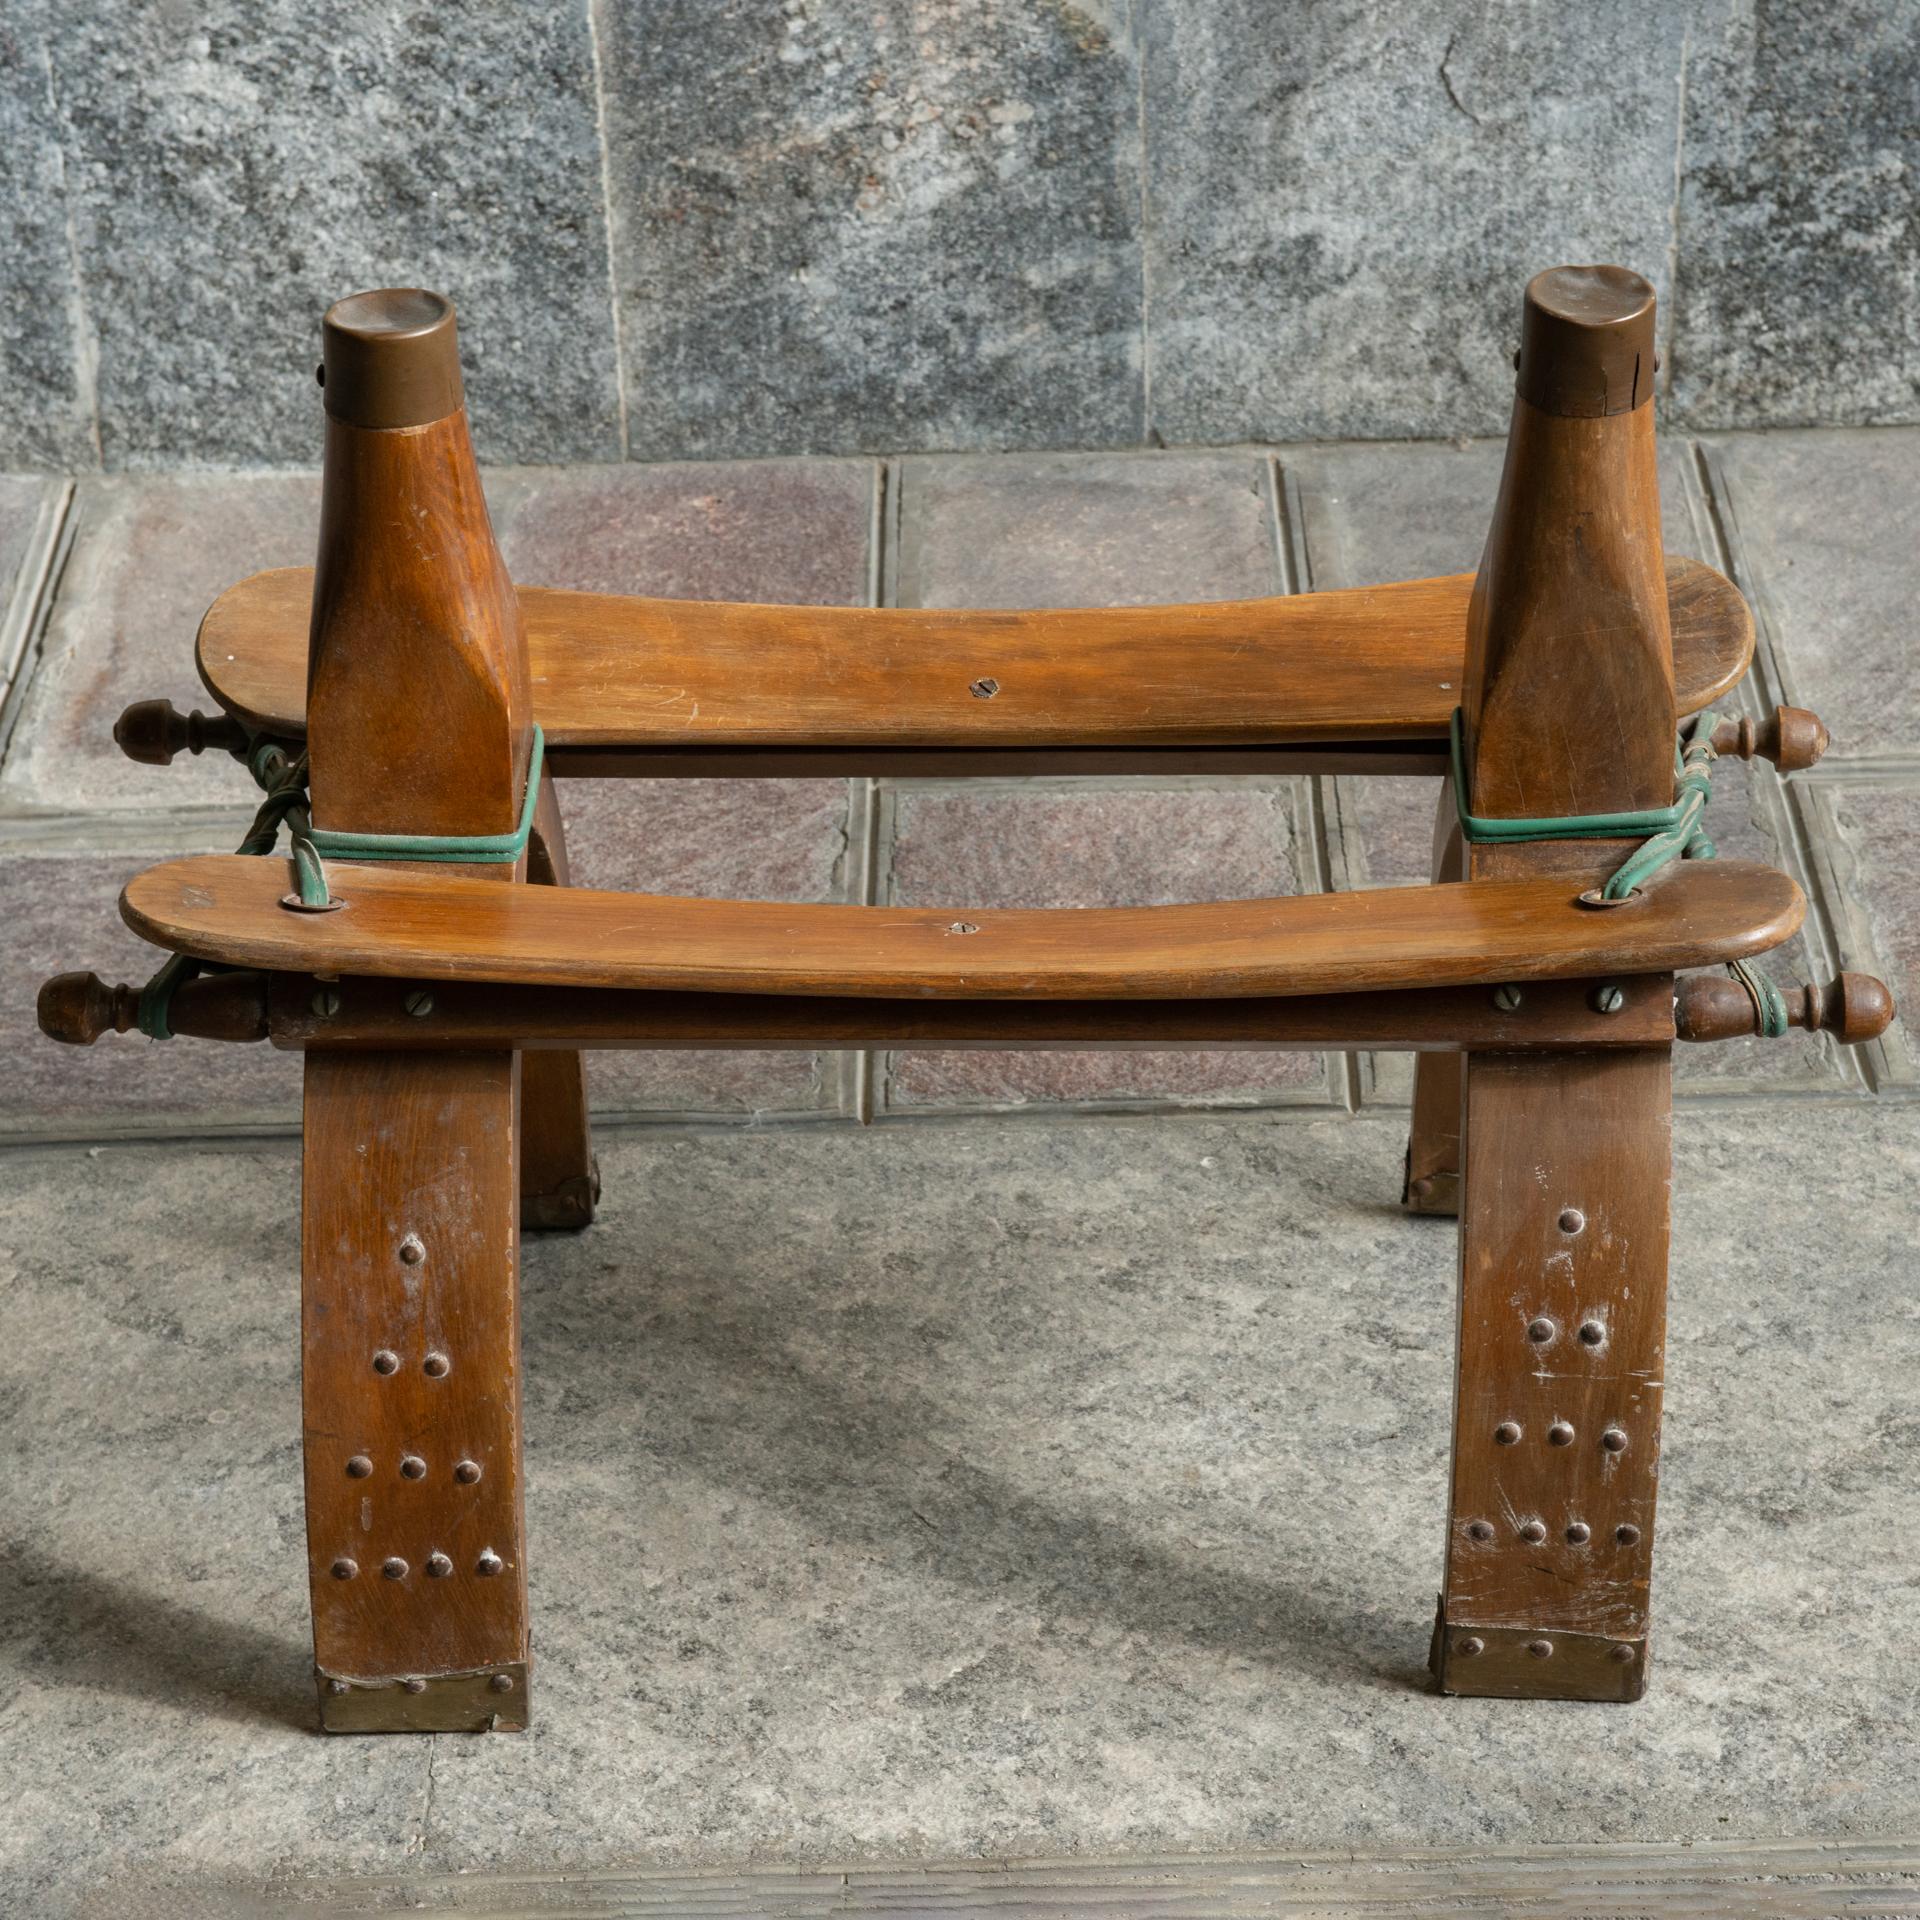 M/1949 -  Vintage Ottoman Moroccan camel leather saddle stool: in original condition, comfortable abd sturdy. The cushion has some slightly worn edges.